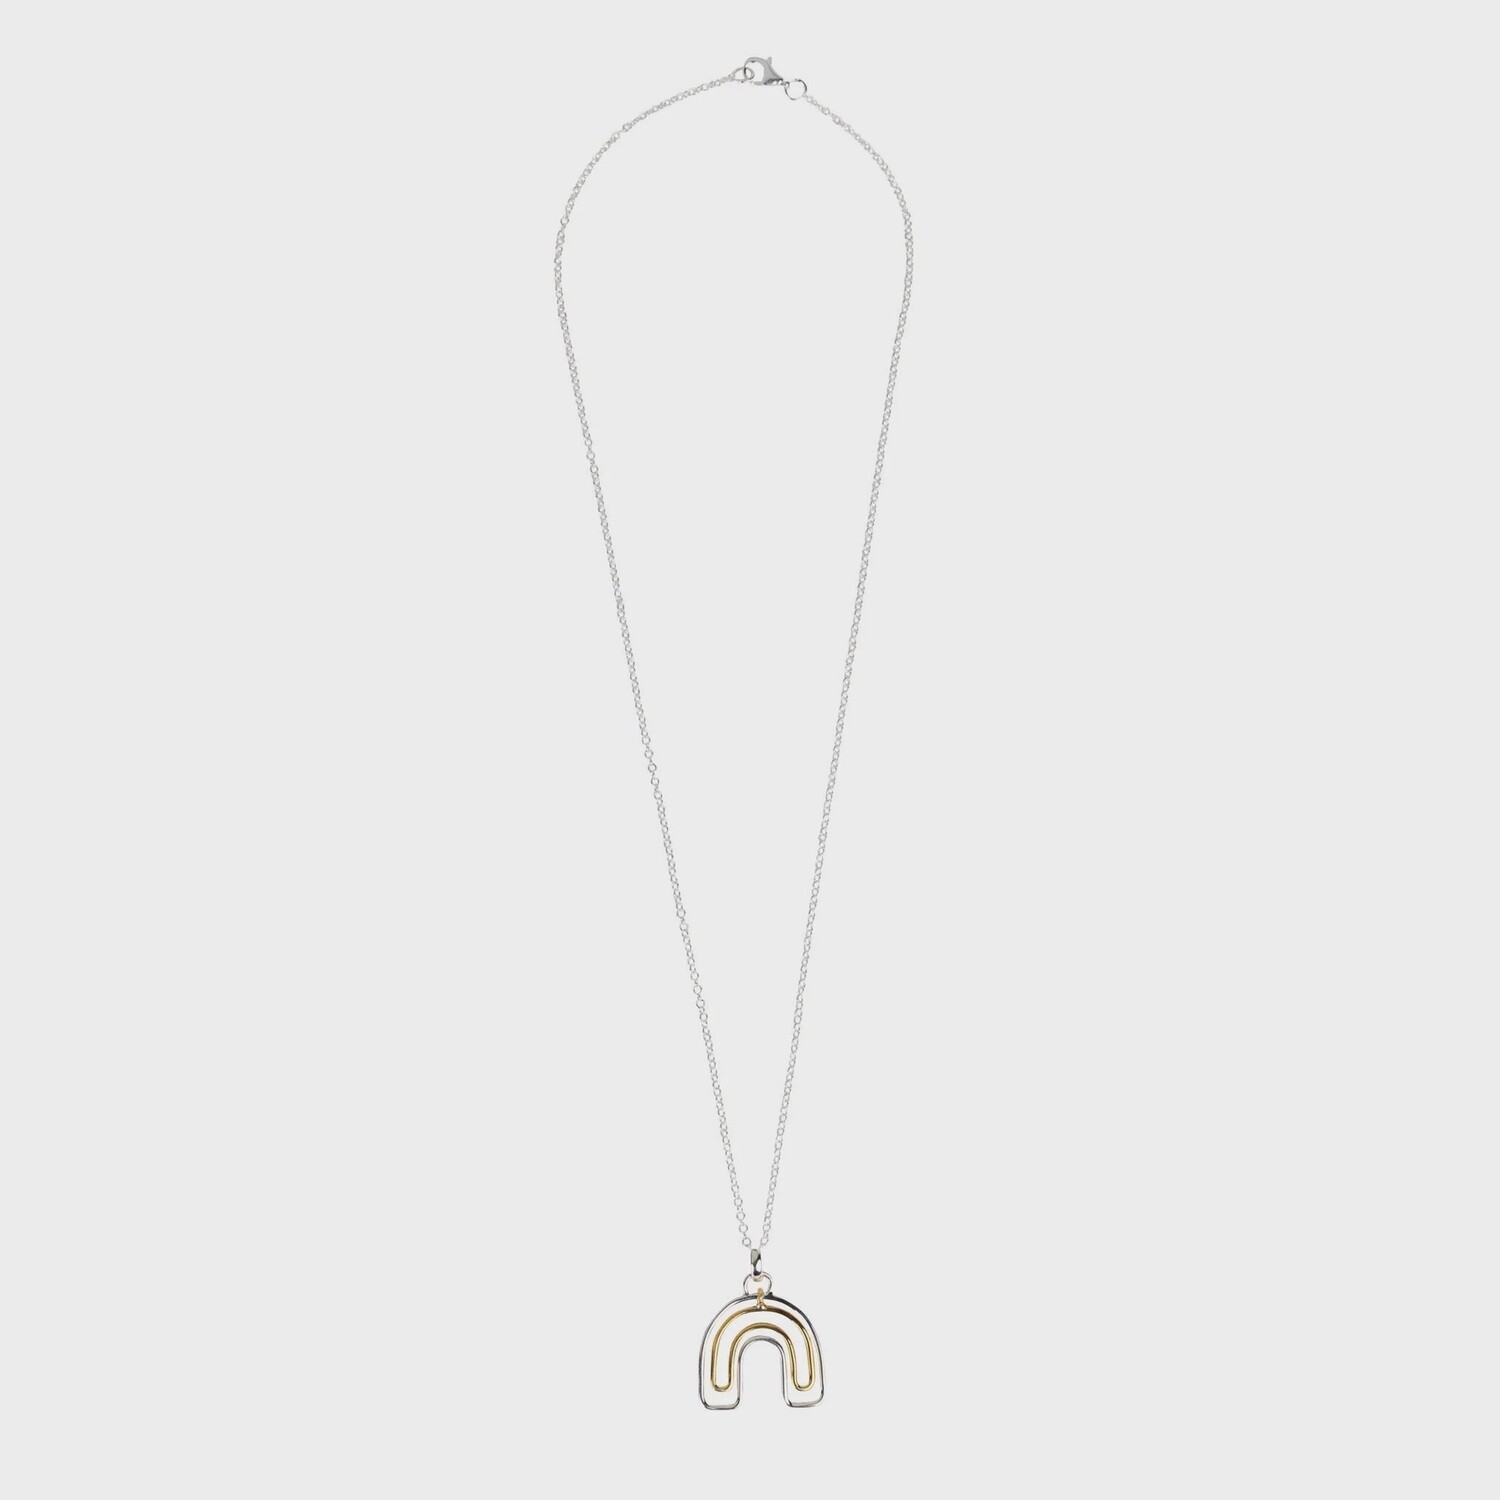 Arco Rainbow Charm Sterling Necklace